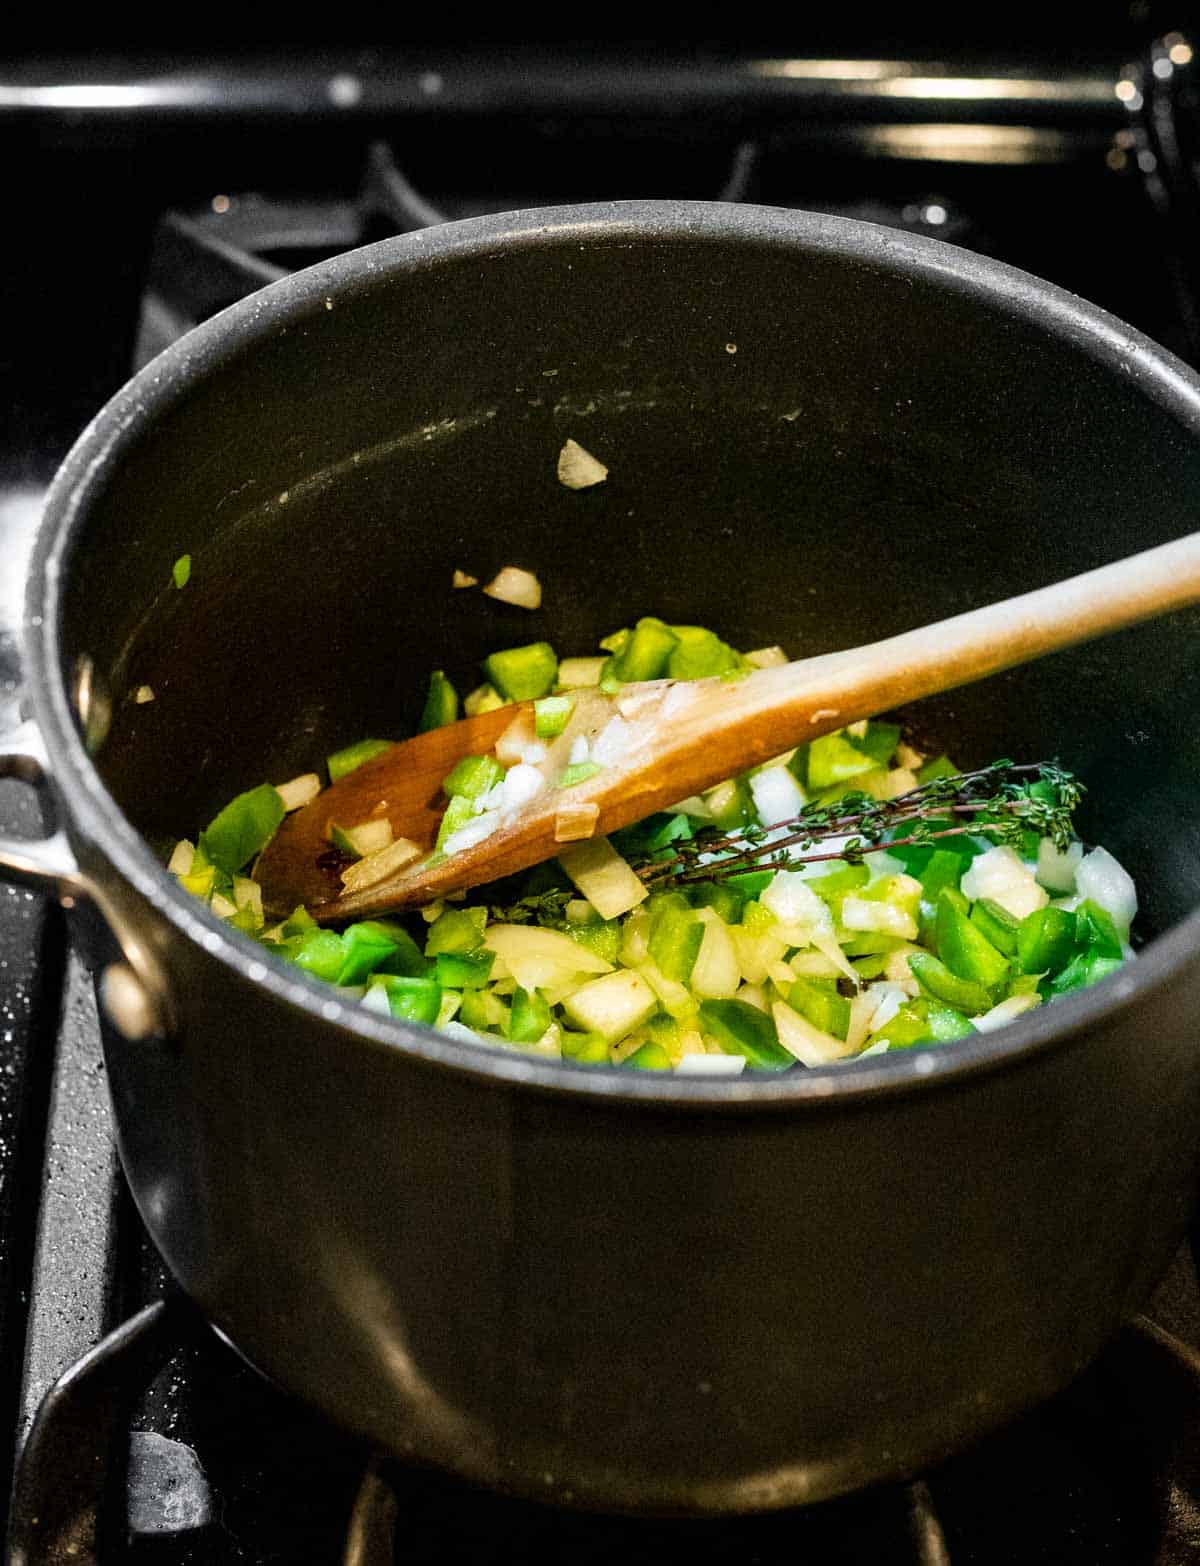 green peppers and onions being cooked in a pot